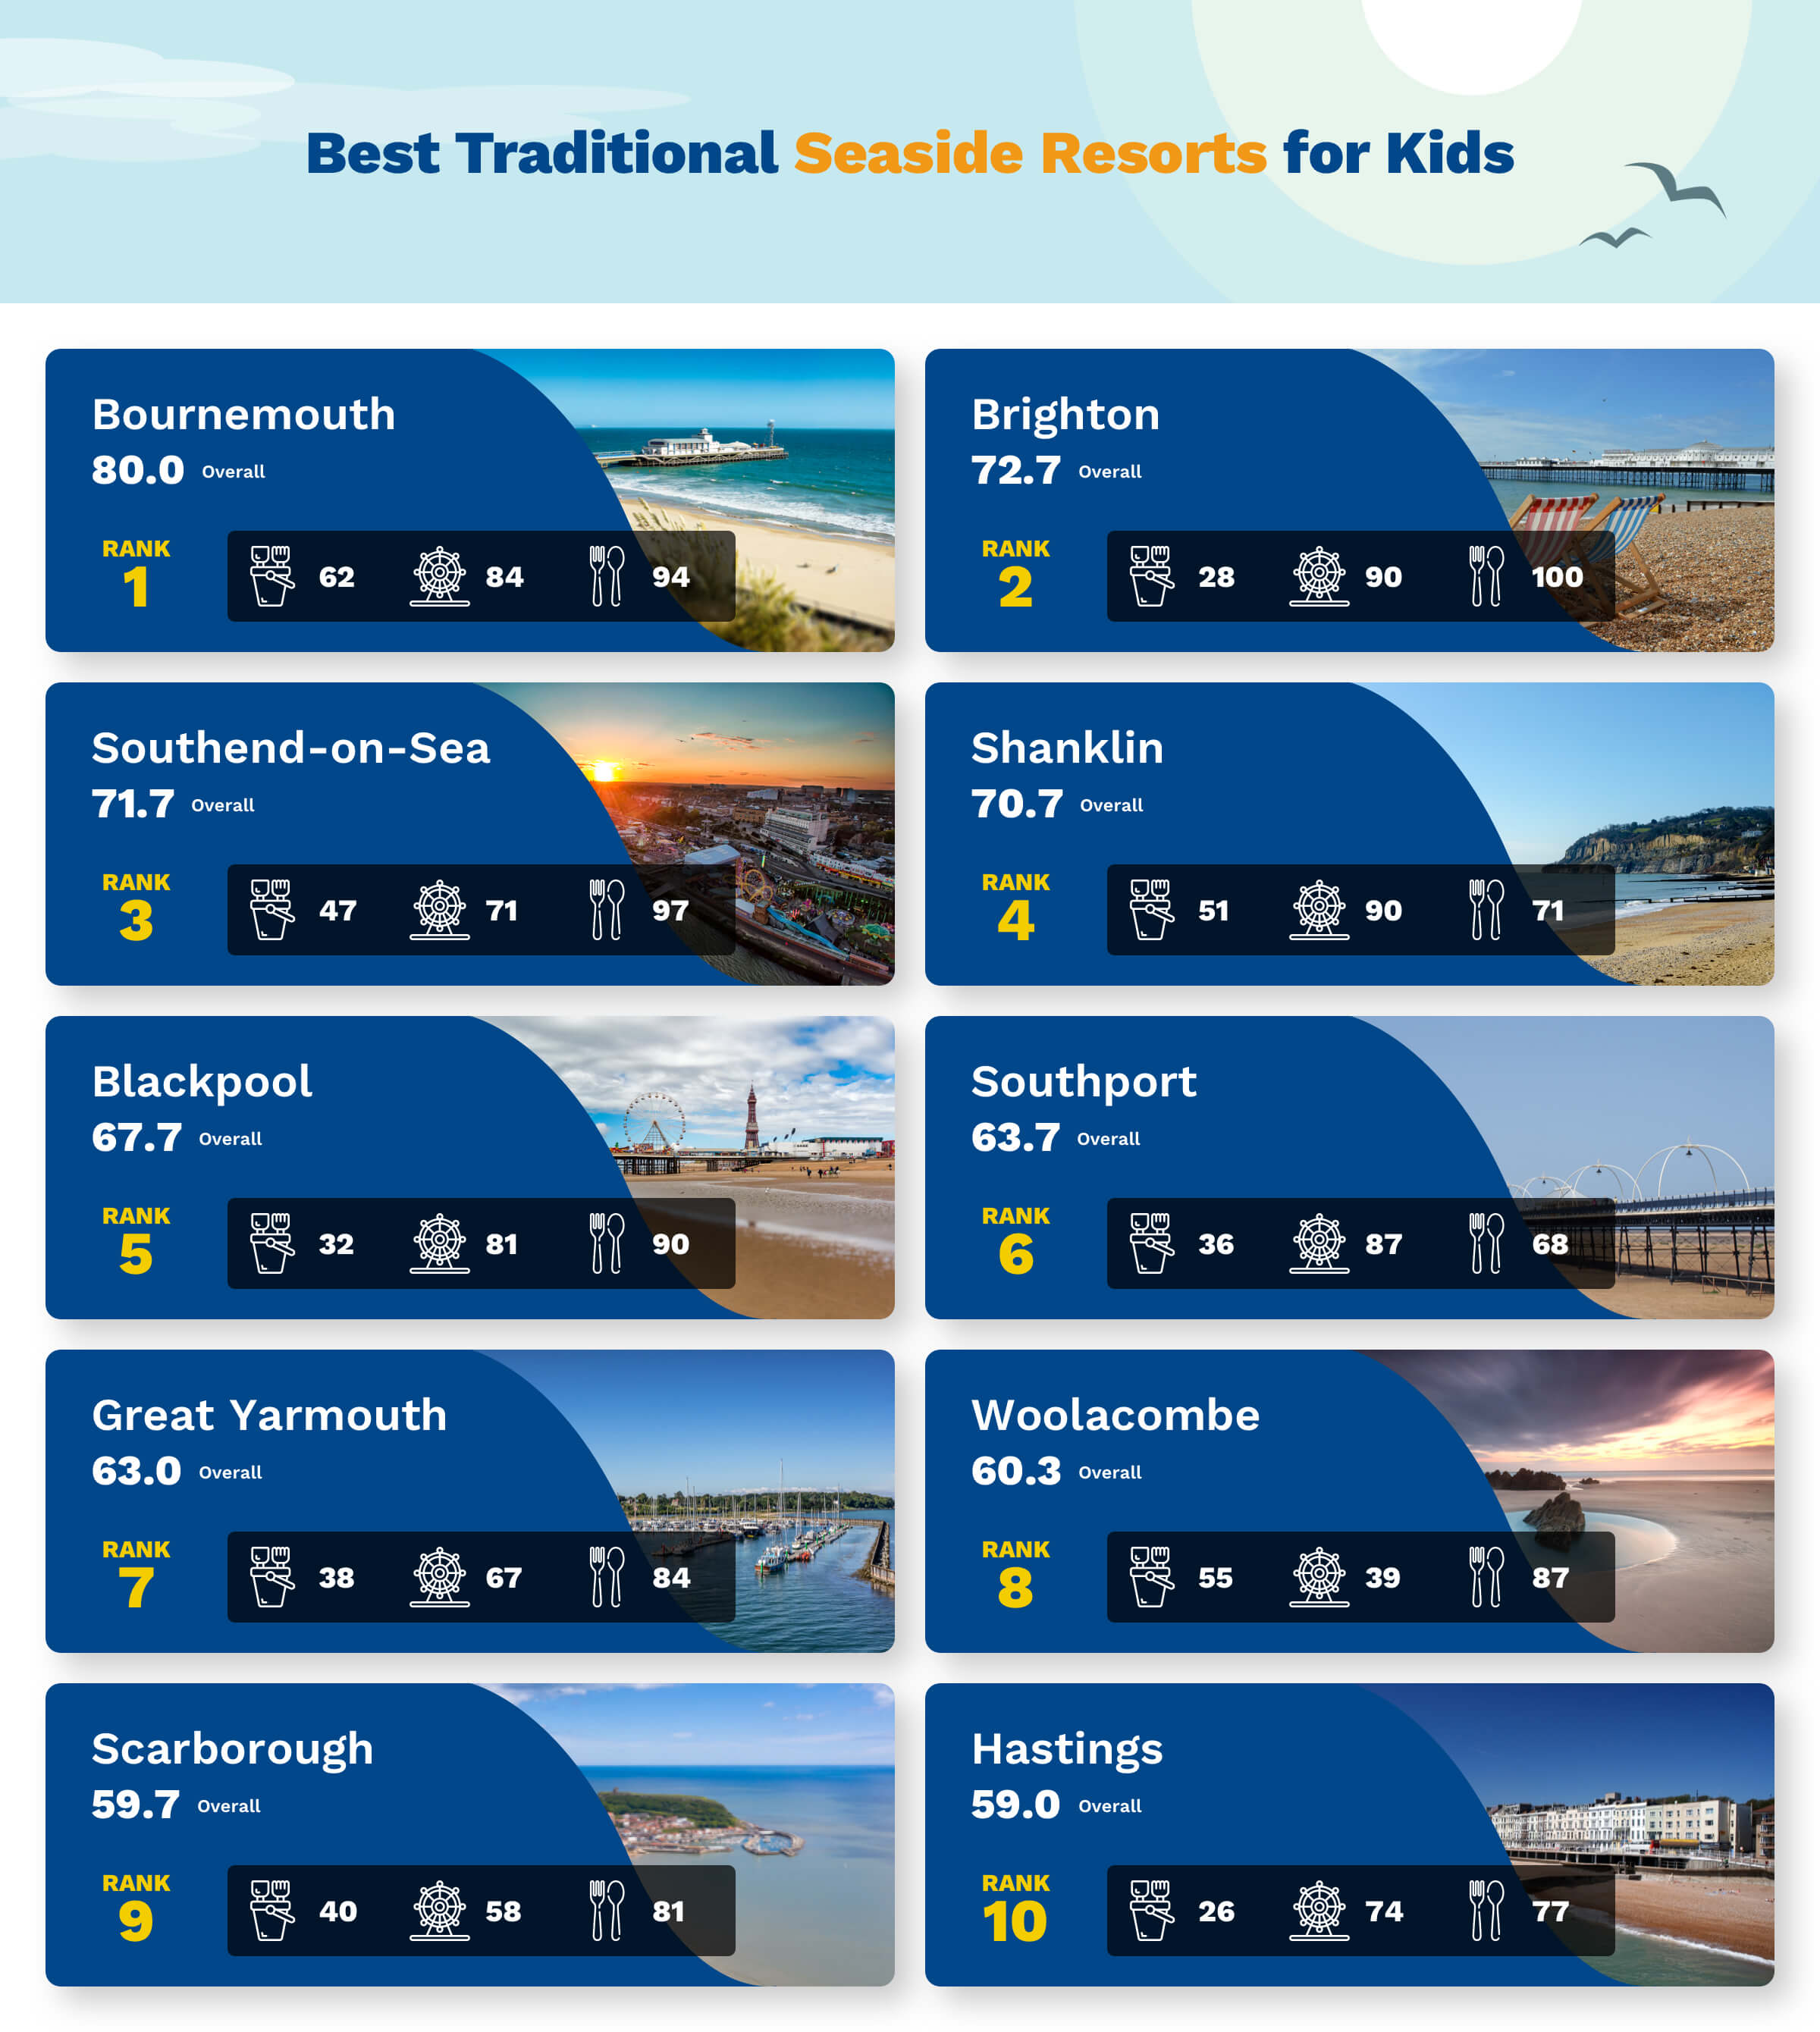 ​Best Traditional Seaside Resorts for Kids